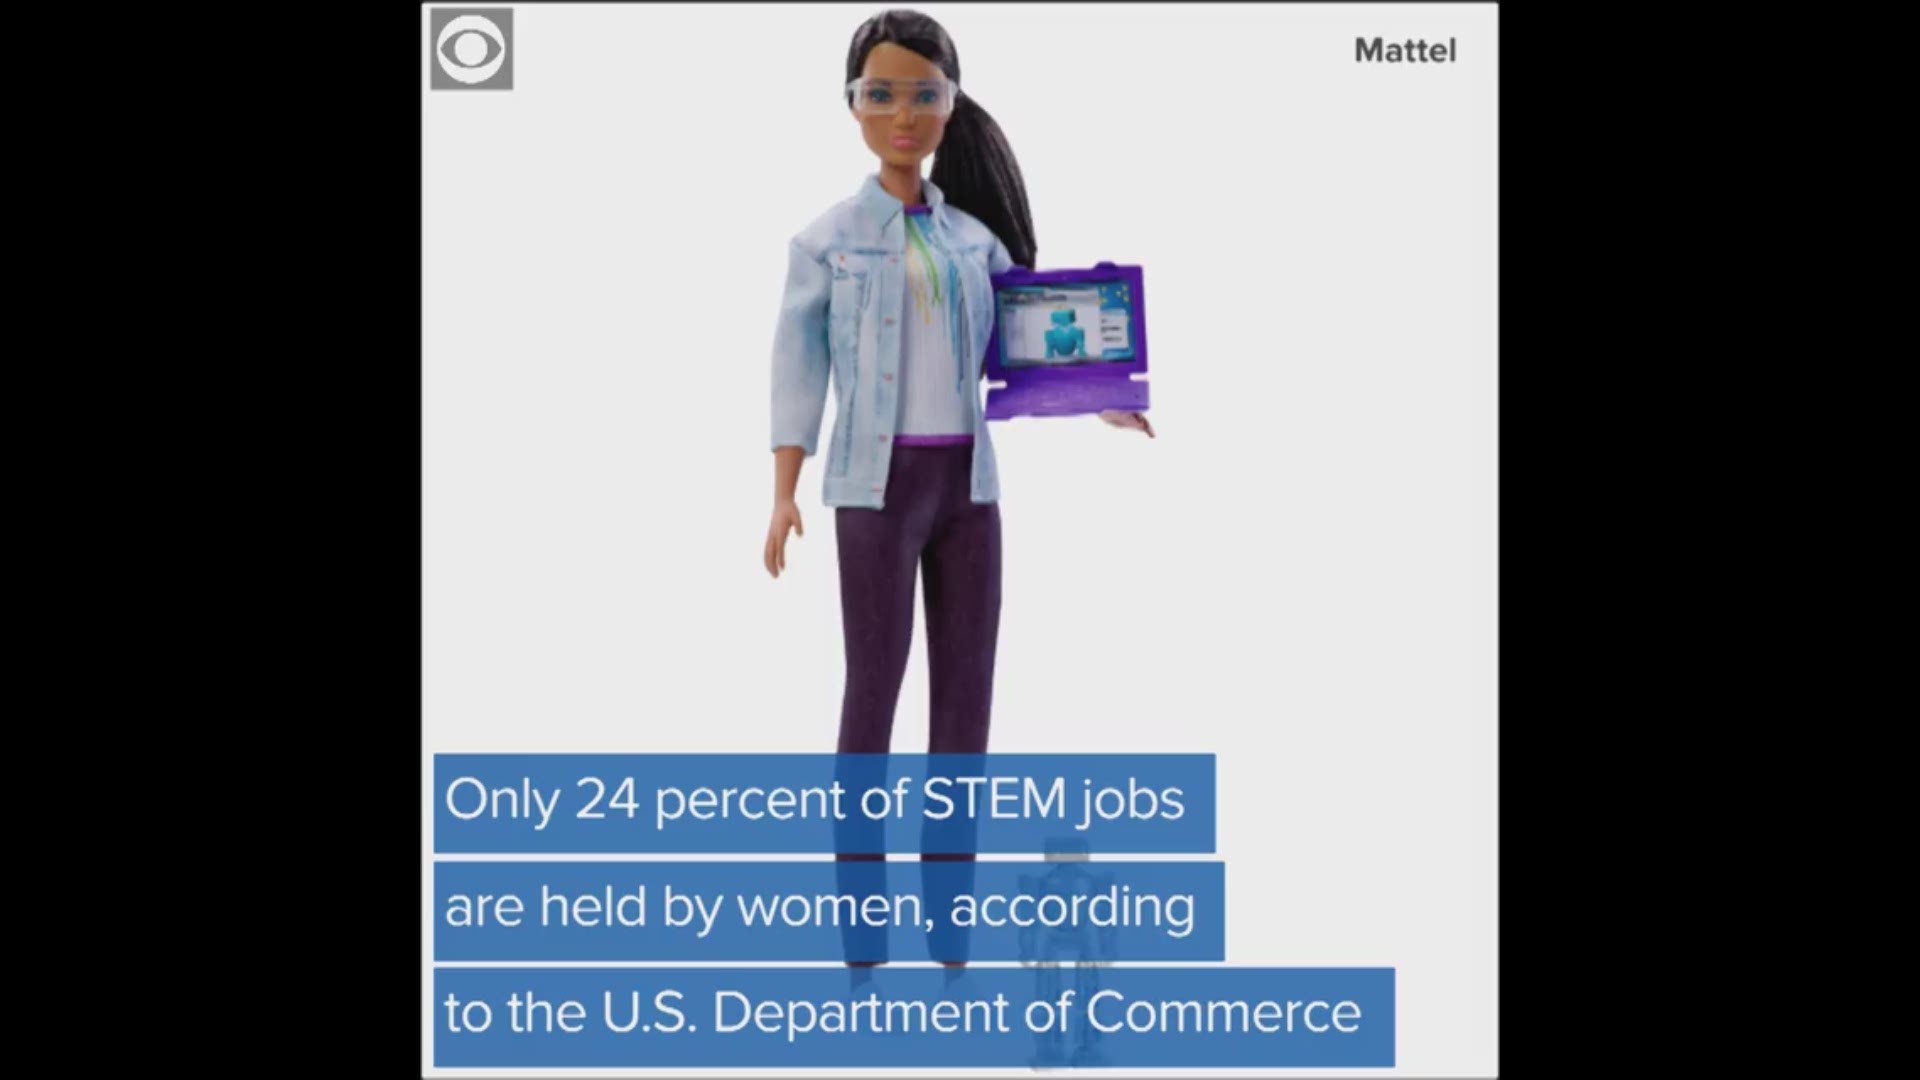 The new Barbie is designed to encourage girls' interest in science, technology, engineering and math, or STEM, and highlight a field where women are underrepresented